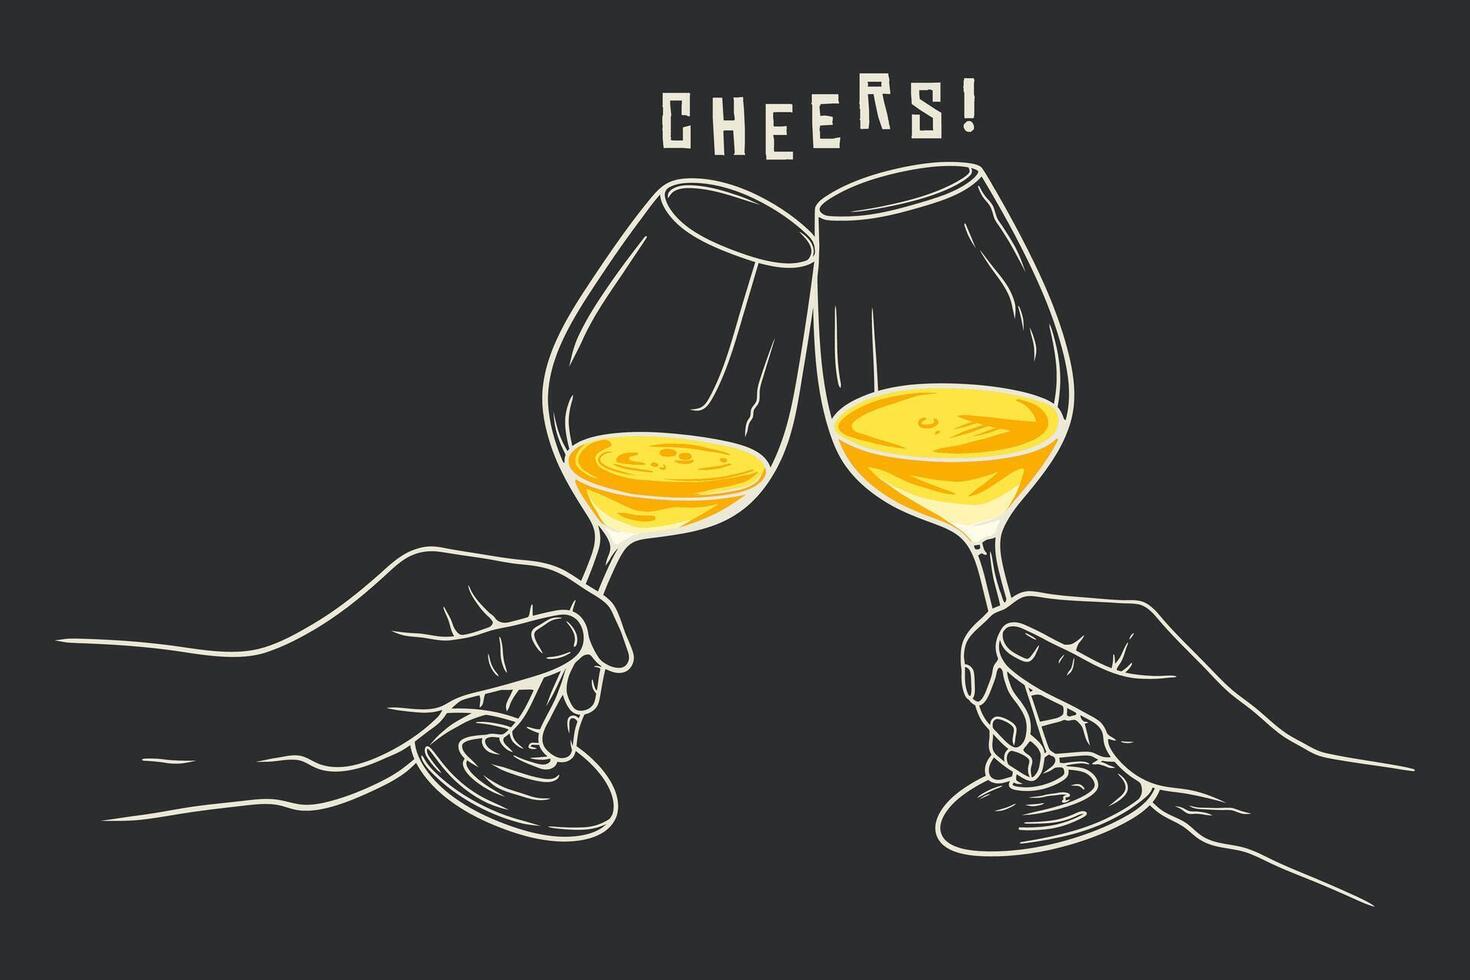 Illustration of two hands clinking glasses of white wine on black background vector